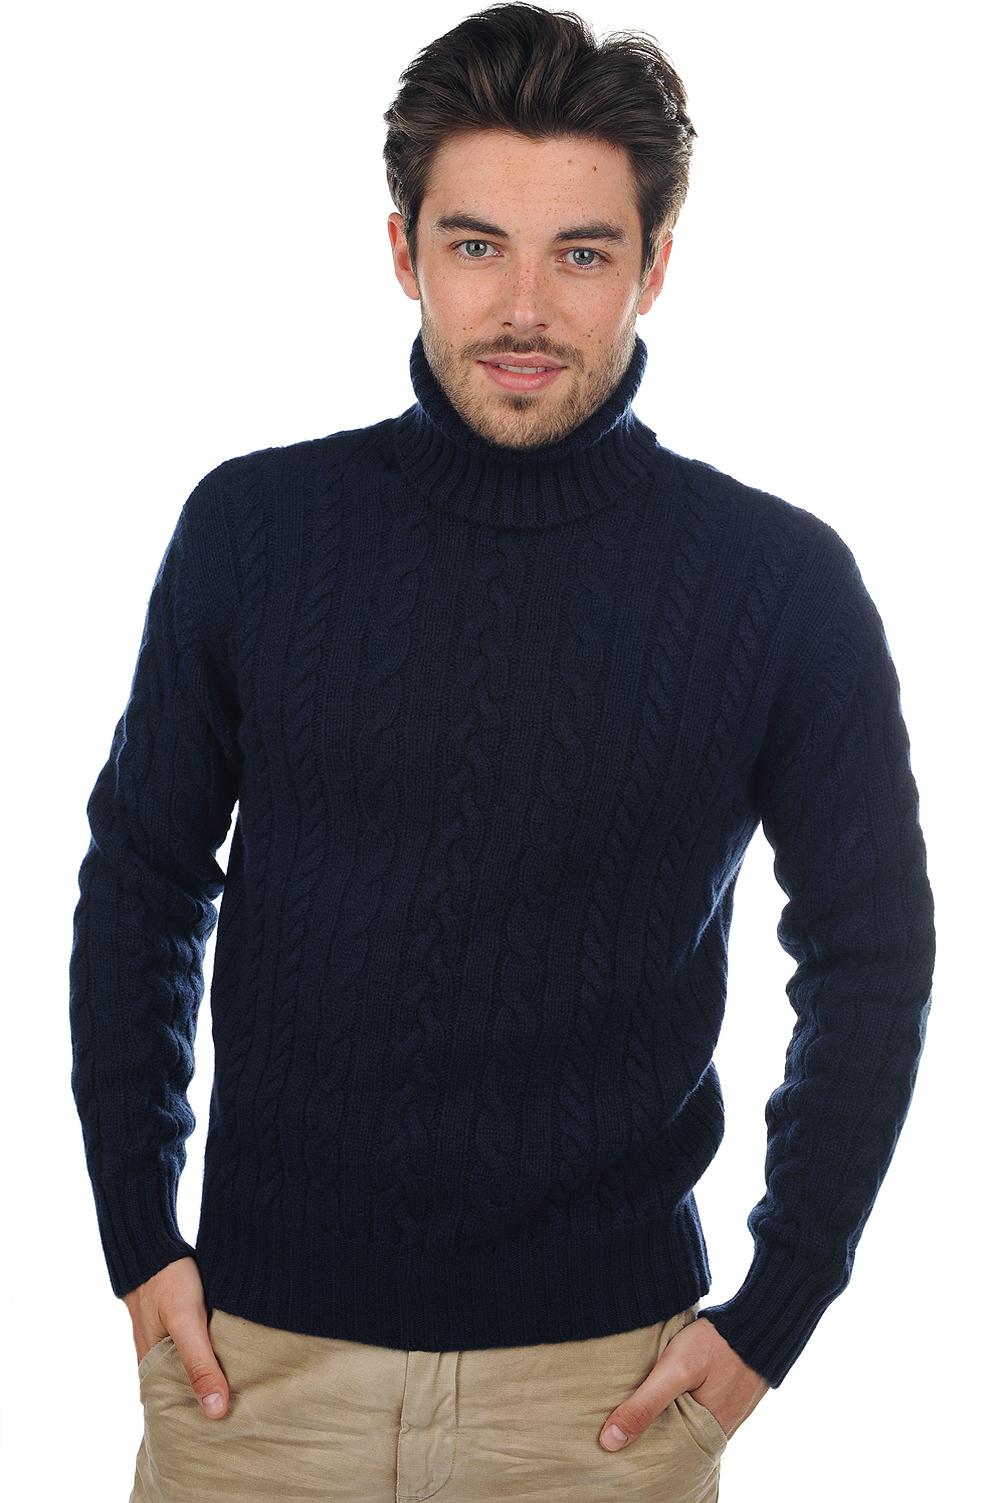 Cachemire pull homme lucas marine fonce s